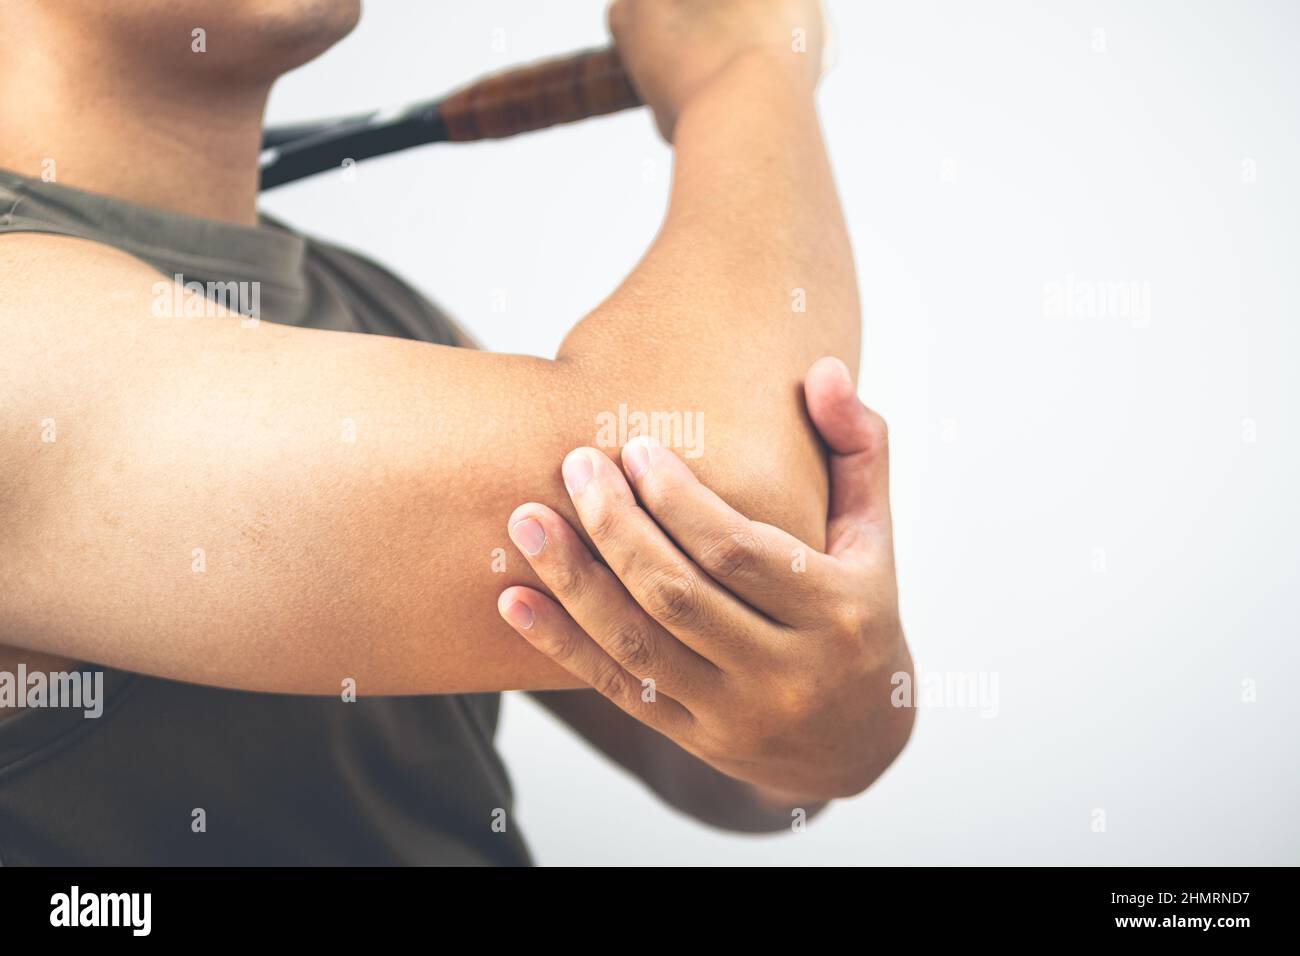 Tennis elbow injury concept. The man holds racket. Healthcare knowledge. Medium close up shot. Stock Photo